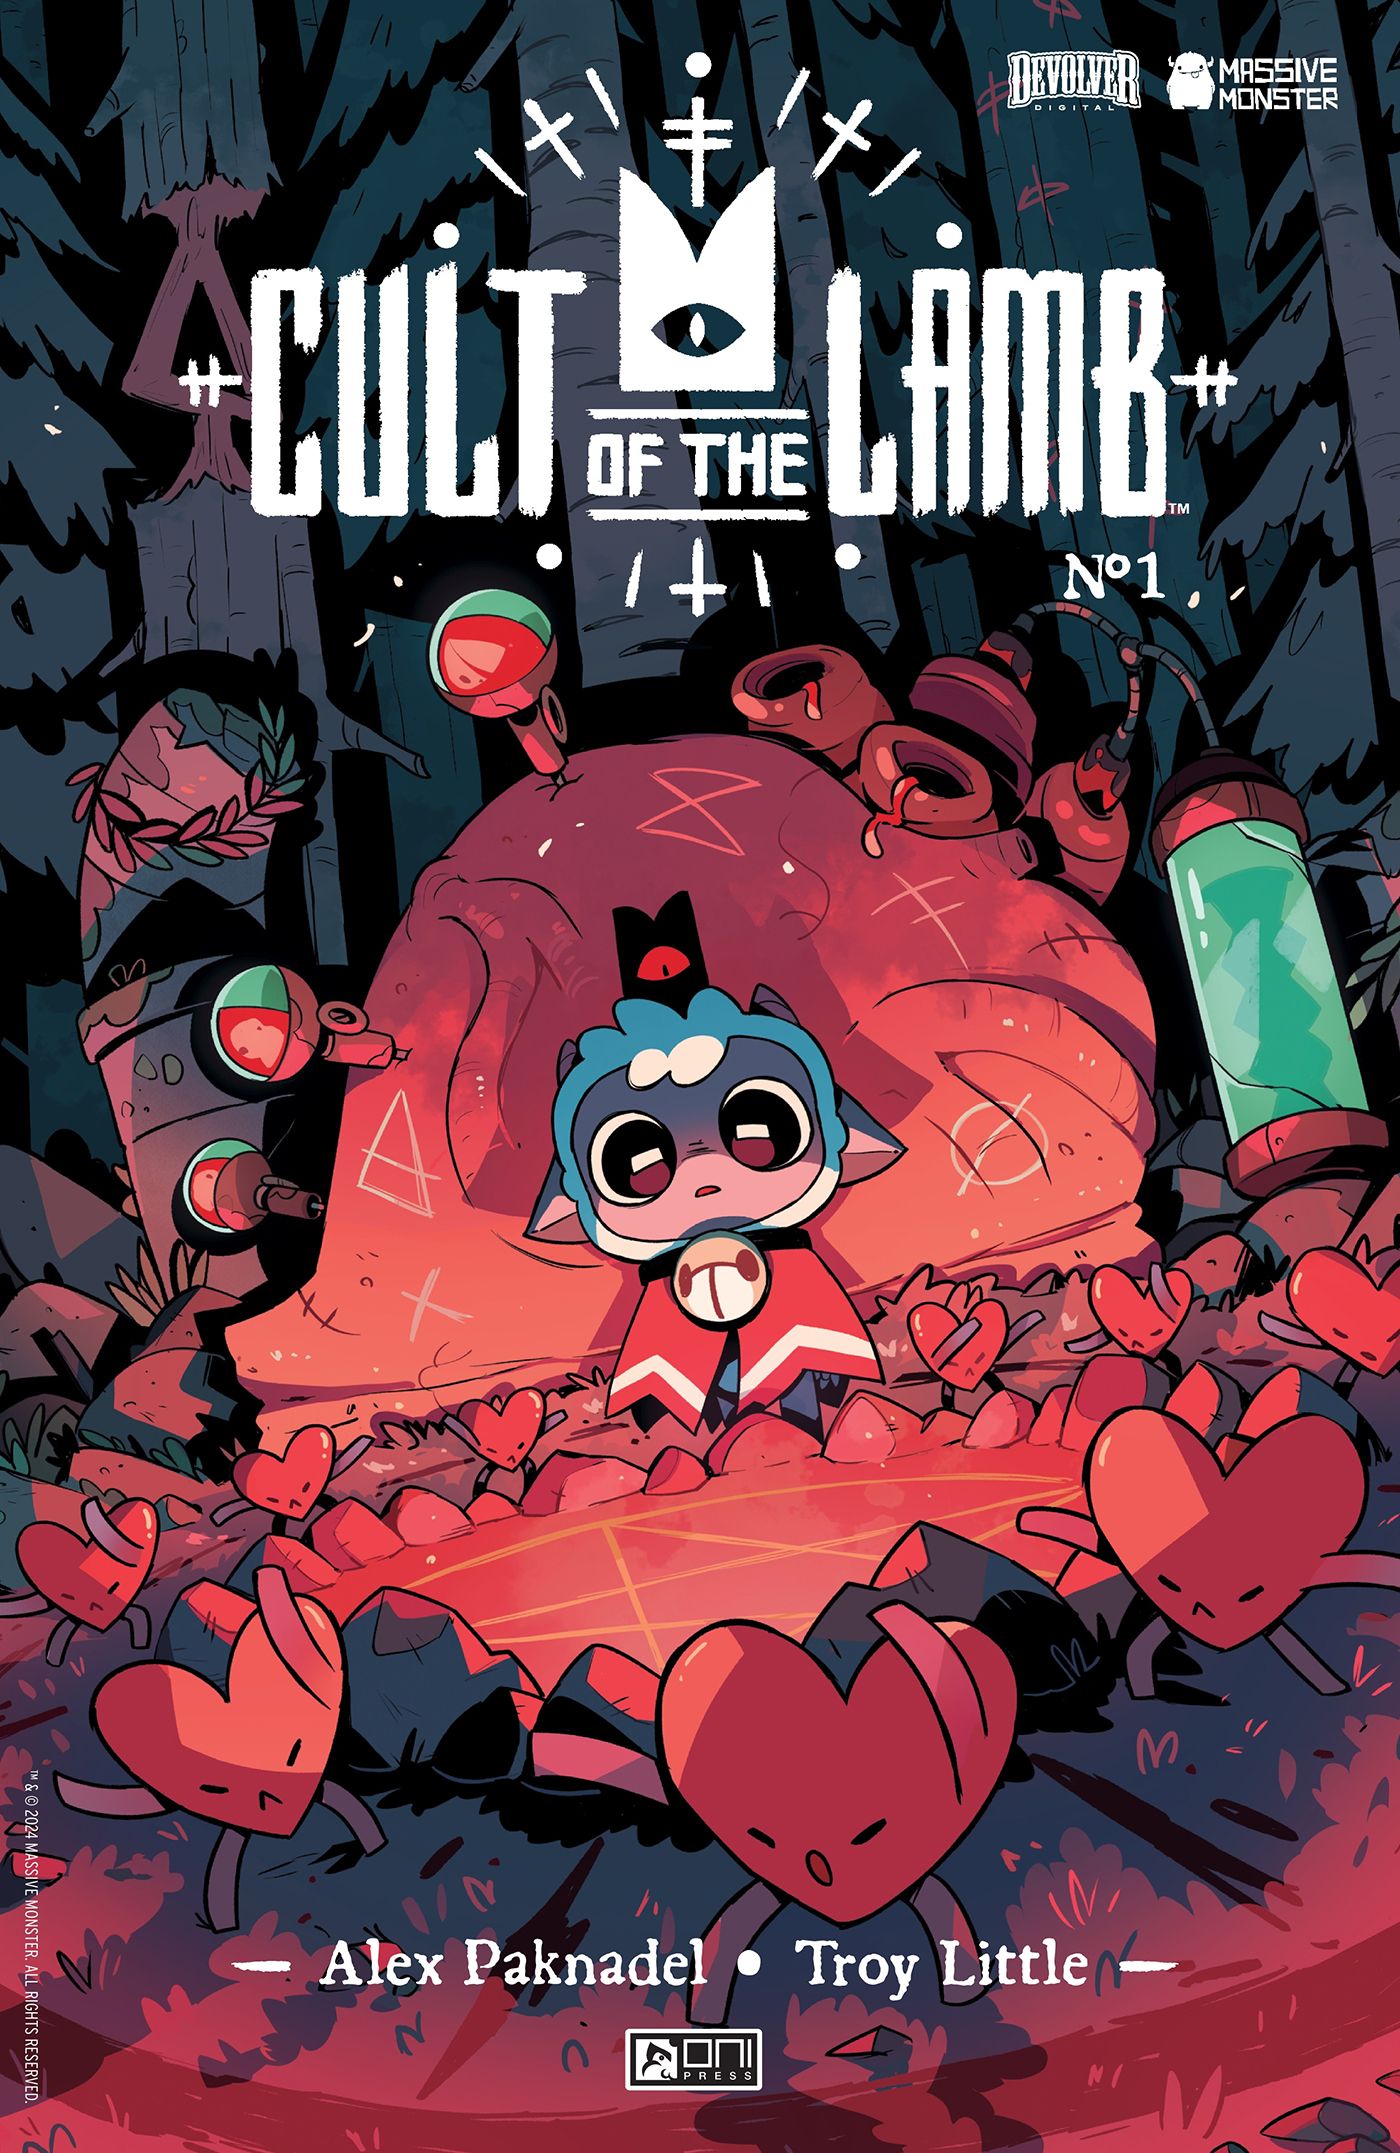 Cult of the Lamb #1 cover by Carles Dalmau. The Lamb stands in front of a pentagram sigil, surrounded by hearts.